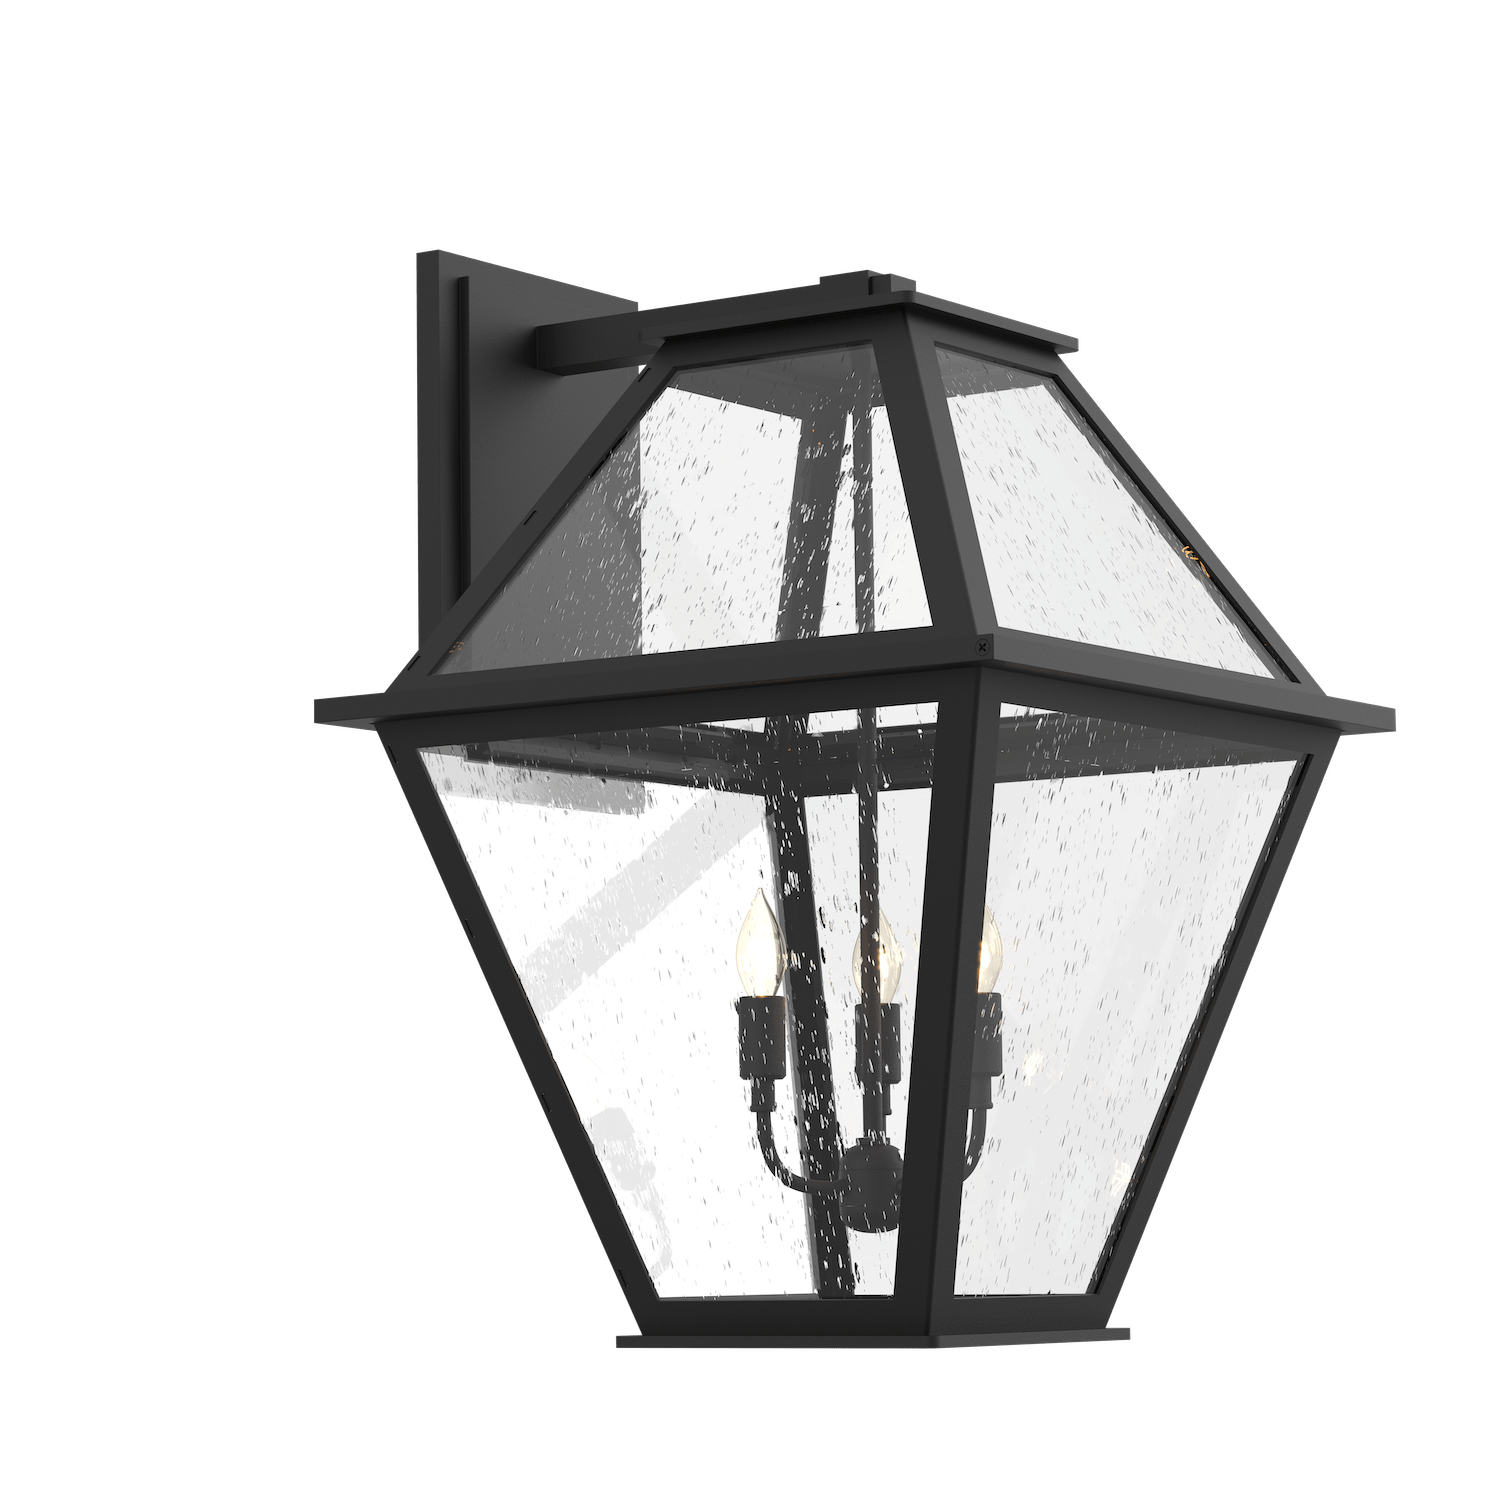 ODB0072-01-TB-CS-Hammerton-Studio-Terrace-24-inch-outdoor-candelabra-lantern-with-textured-black-finish-and-clear-glass-shade-and-incandescent-lamping